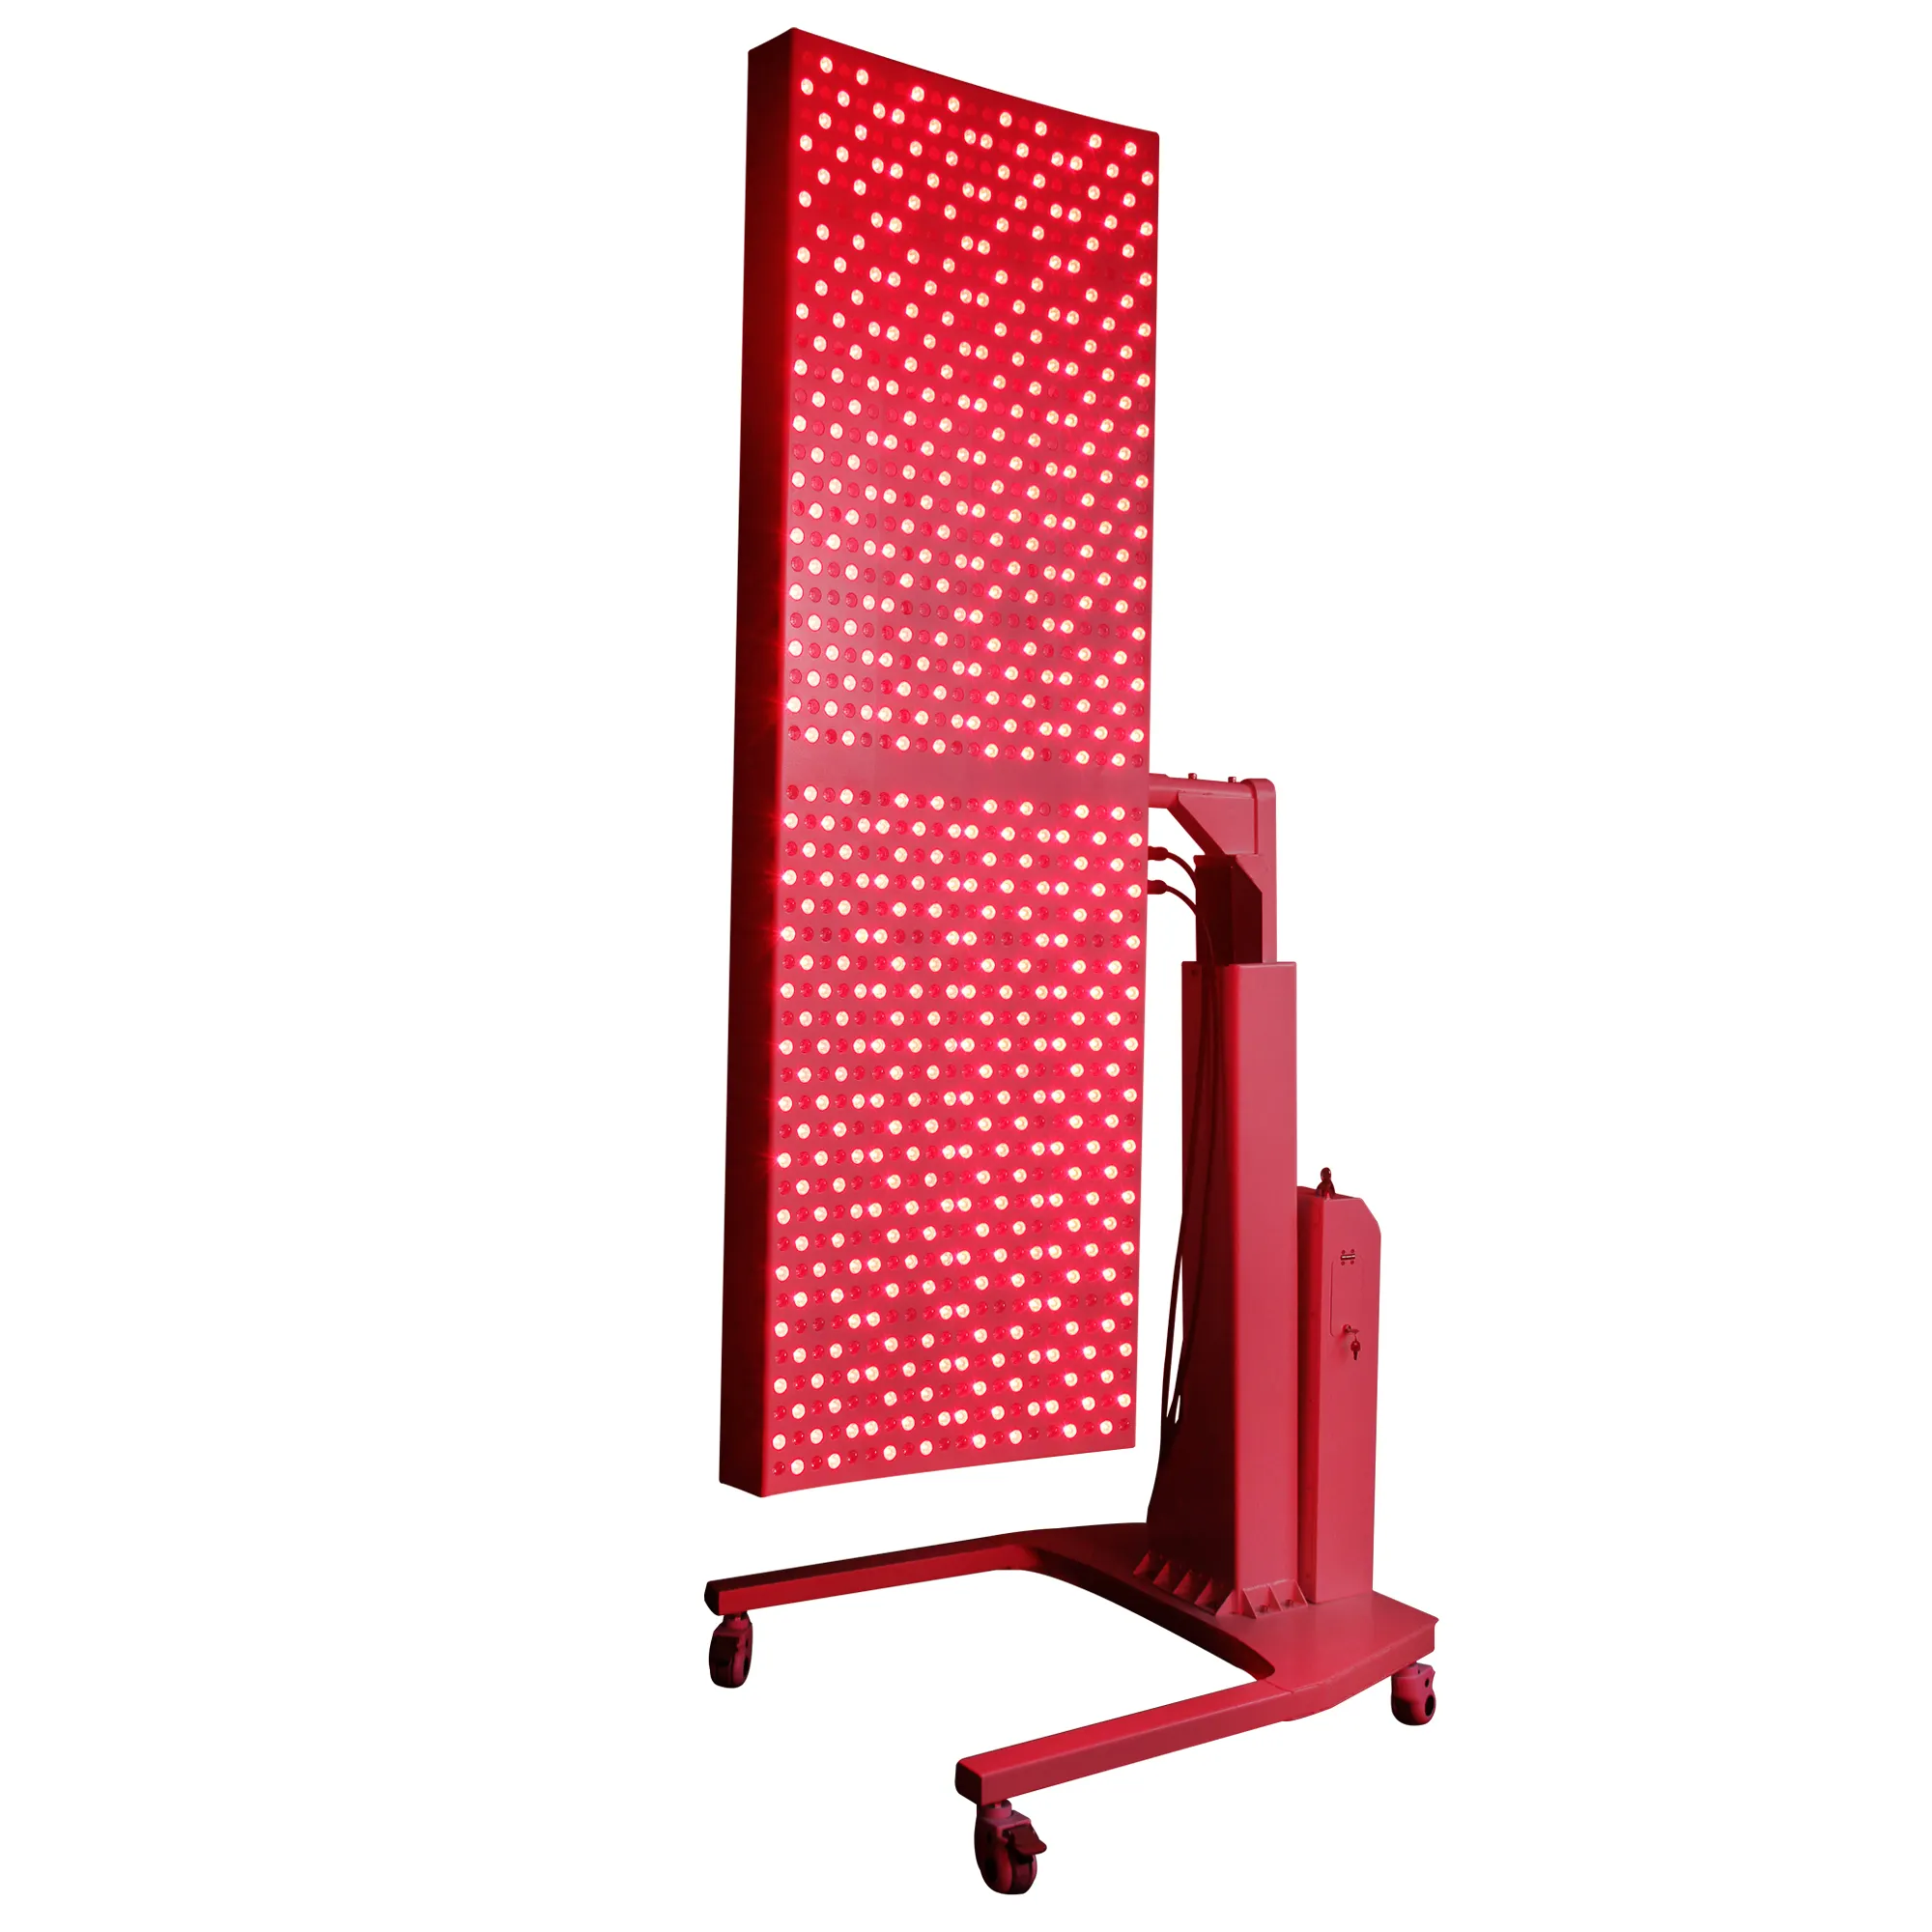 Ideatherapy Beauty Salon Center 3000W 660nm 850nm Wavelength Full Body Red Light Therapy Panel Led Light Therapy Machine